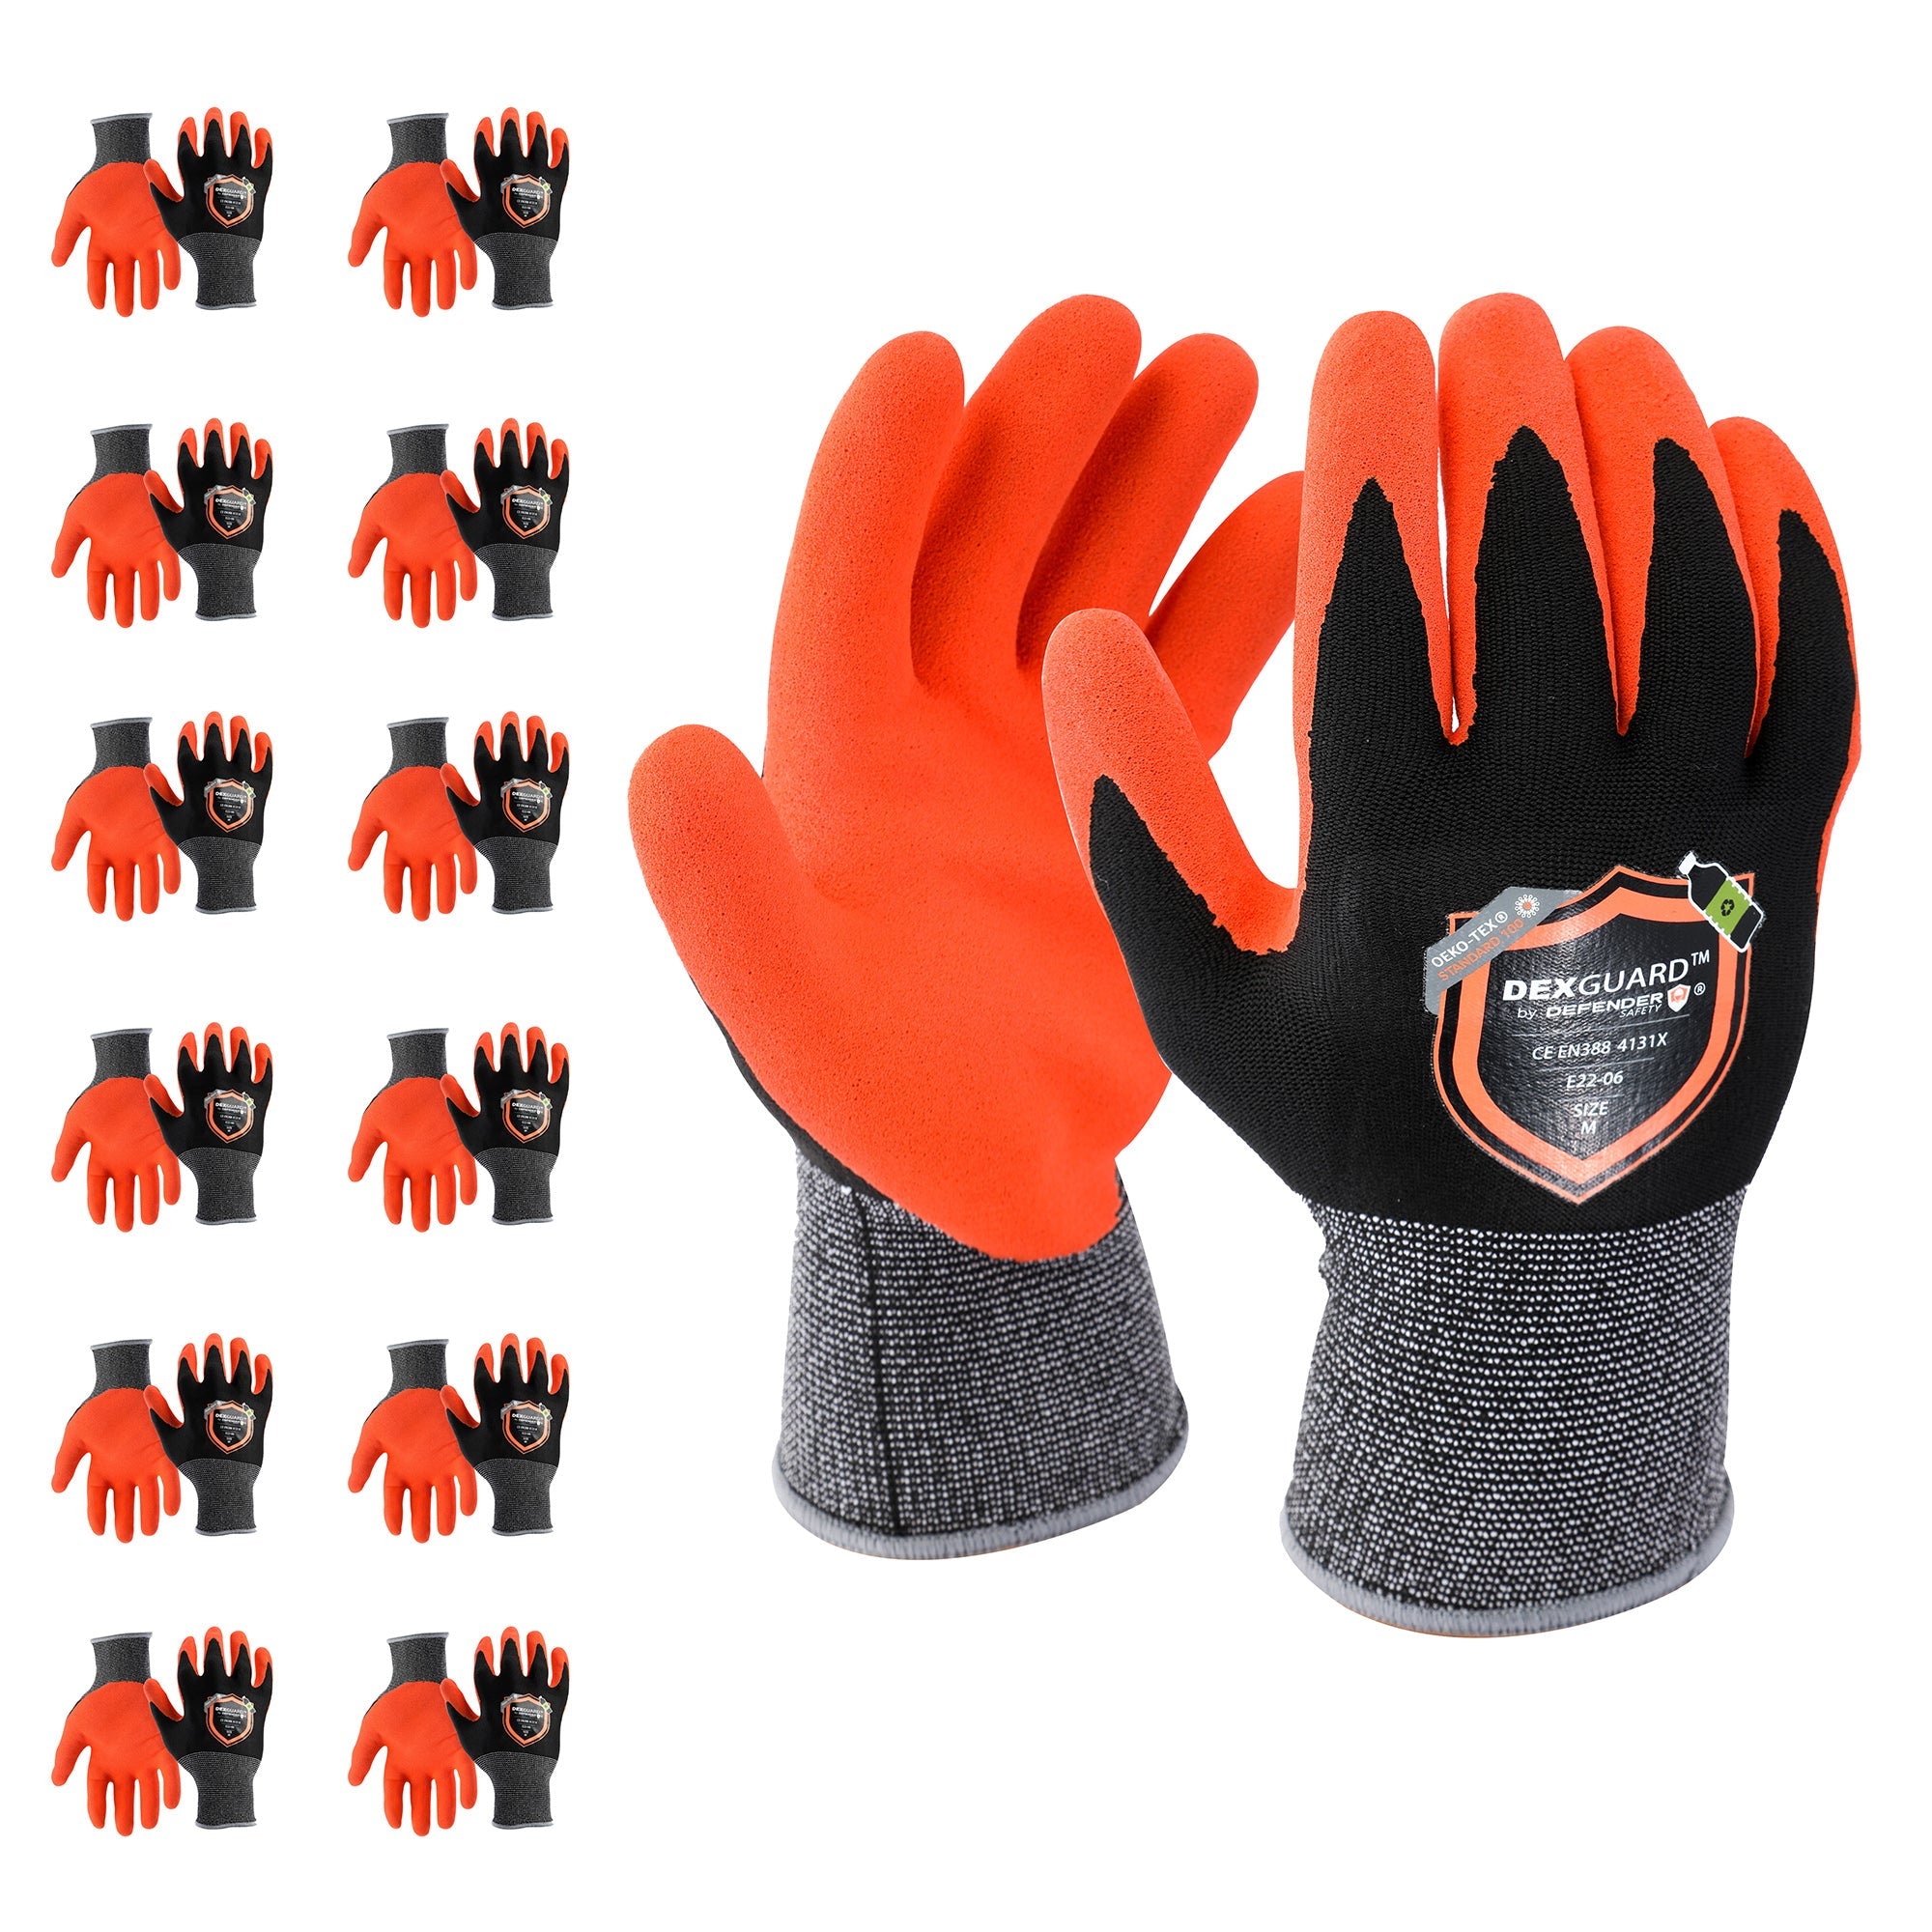 DHNQ Cut Resistant Work Gloves Level 6 Touchscreen Foam Nitrile Sandy  Coated Safety Work Gloves With Grip for Woodworking Construction Gardening Metal  Detecting Large Size L price in Saudi Arabia